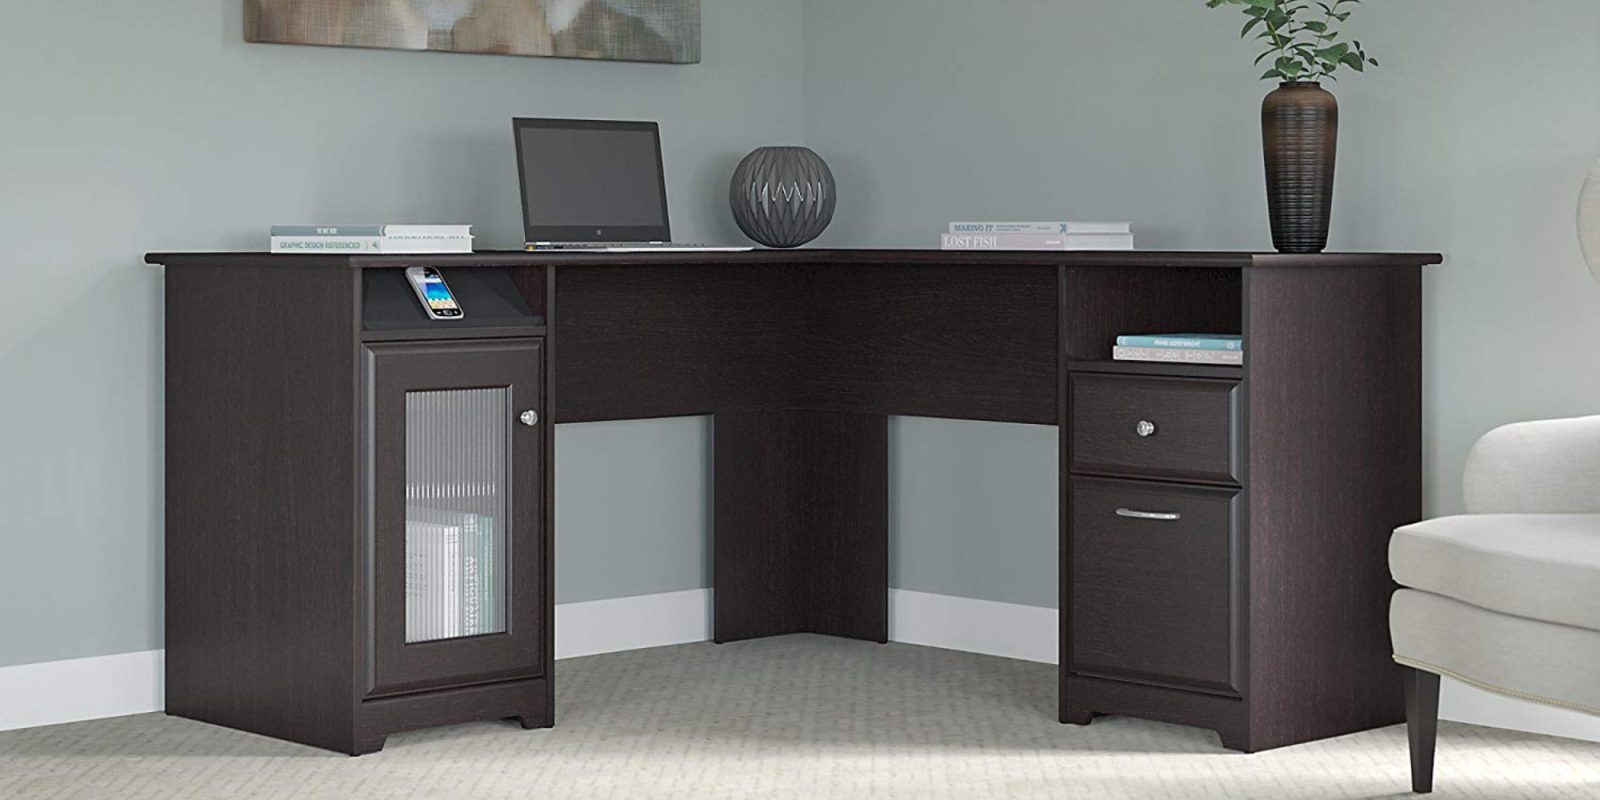 This L Shaped Desk Has A Built In Usb Hub 204 50 At Amazon Reg